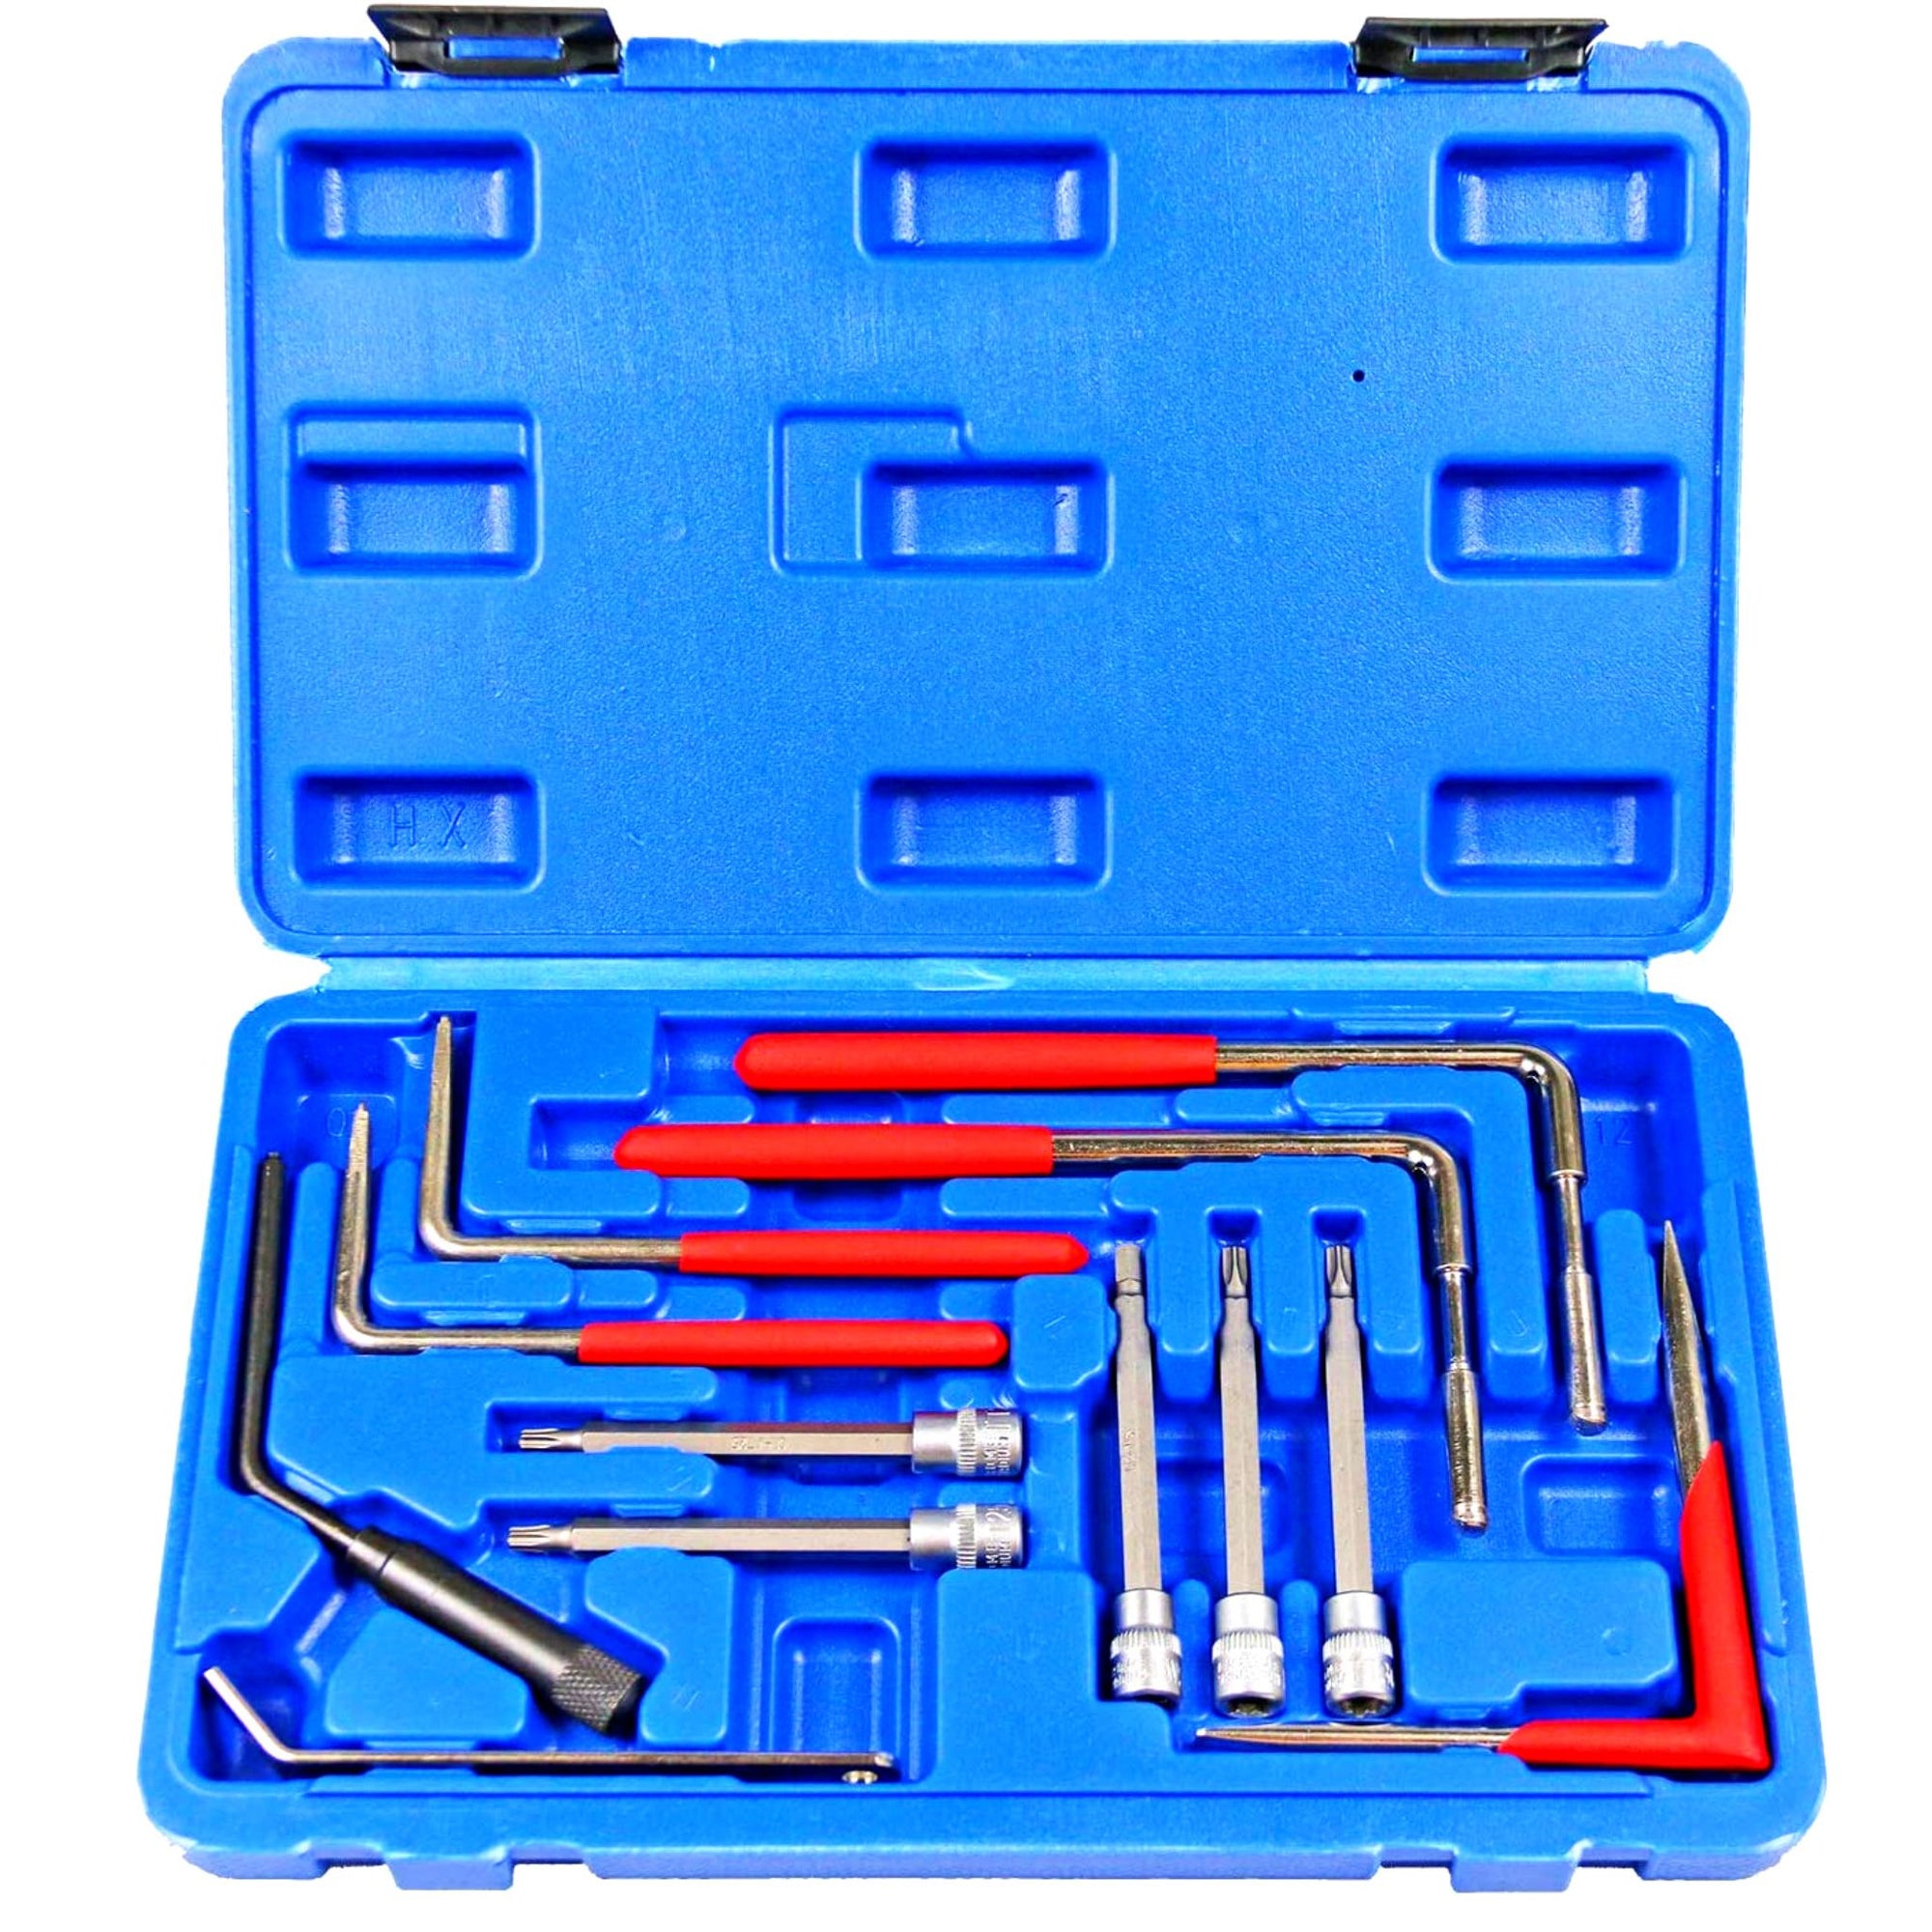 Air Bag Removal Kit - 12 Piece - South East Clearance Centre